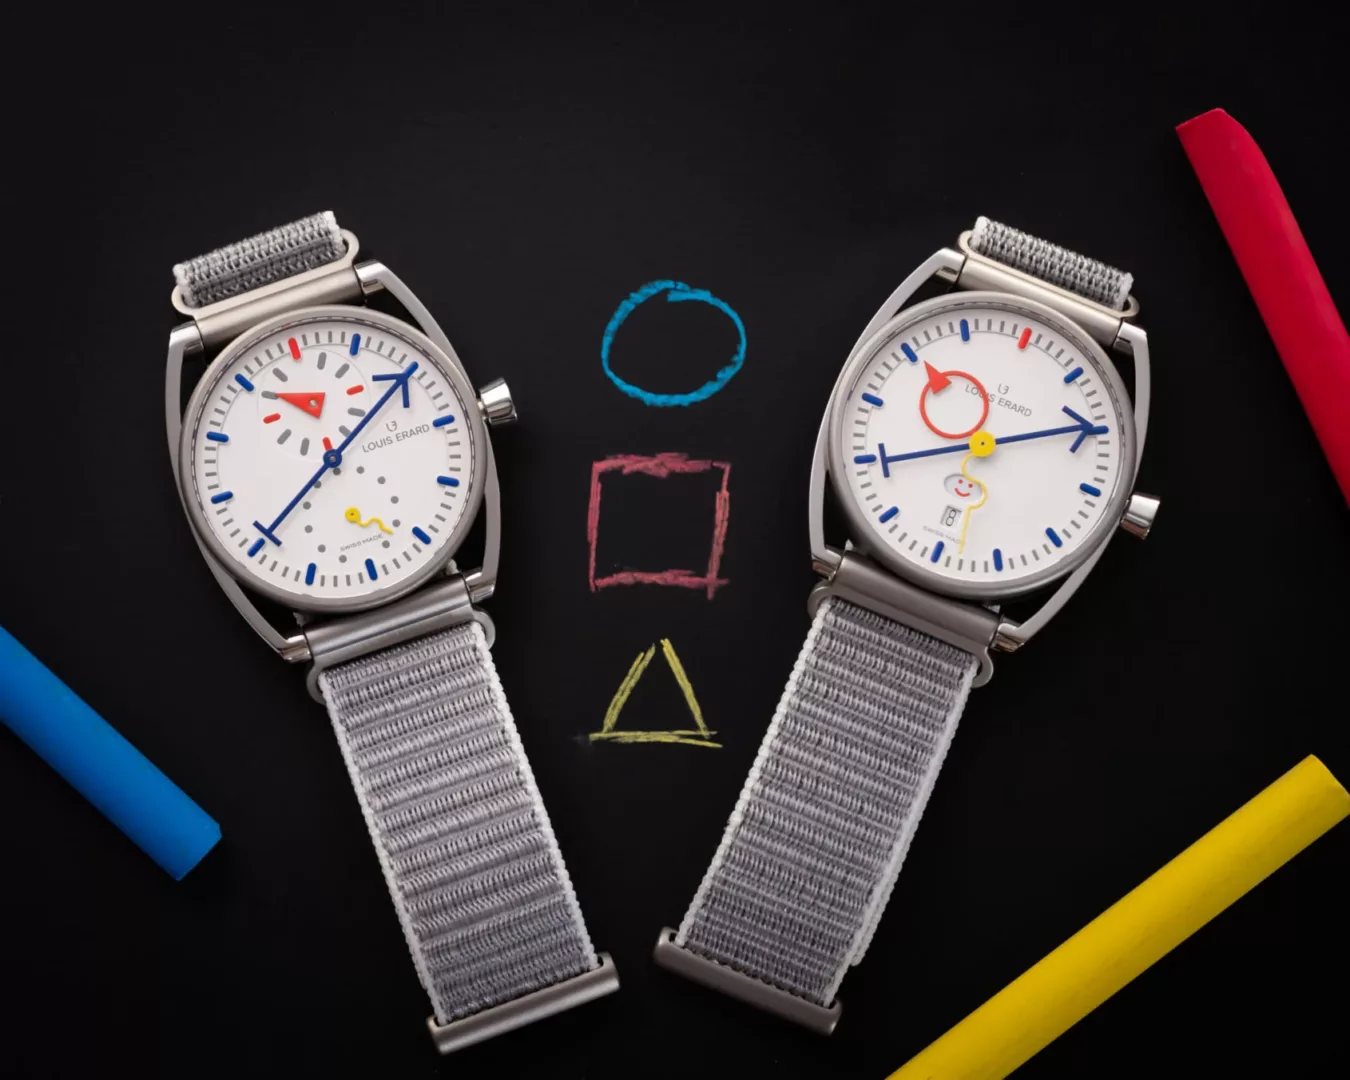 Louis Erard x Alain Silberstein Release 'Triptych' Of New Limited-Edition  Watches